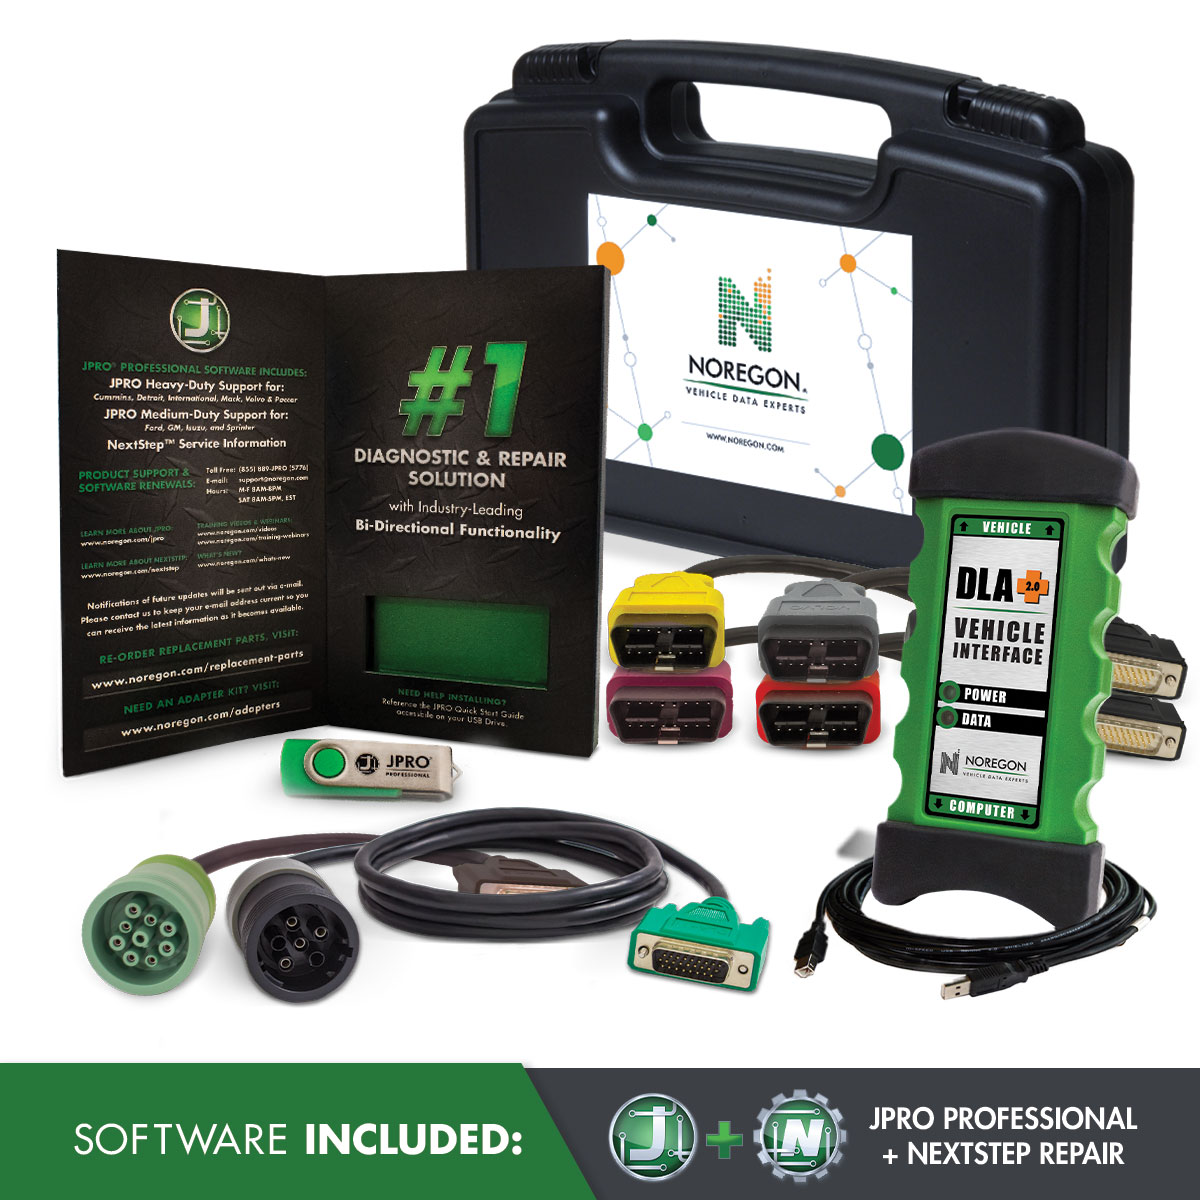 JPRO Professional with Fault Guidance & NextStep Repair Software & Adapter Kit